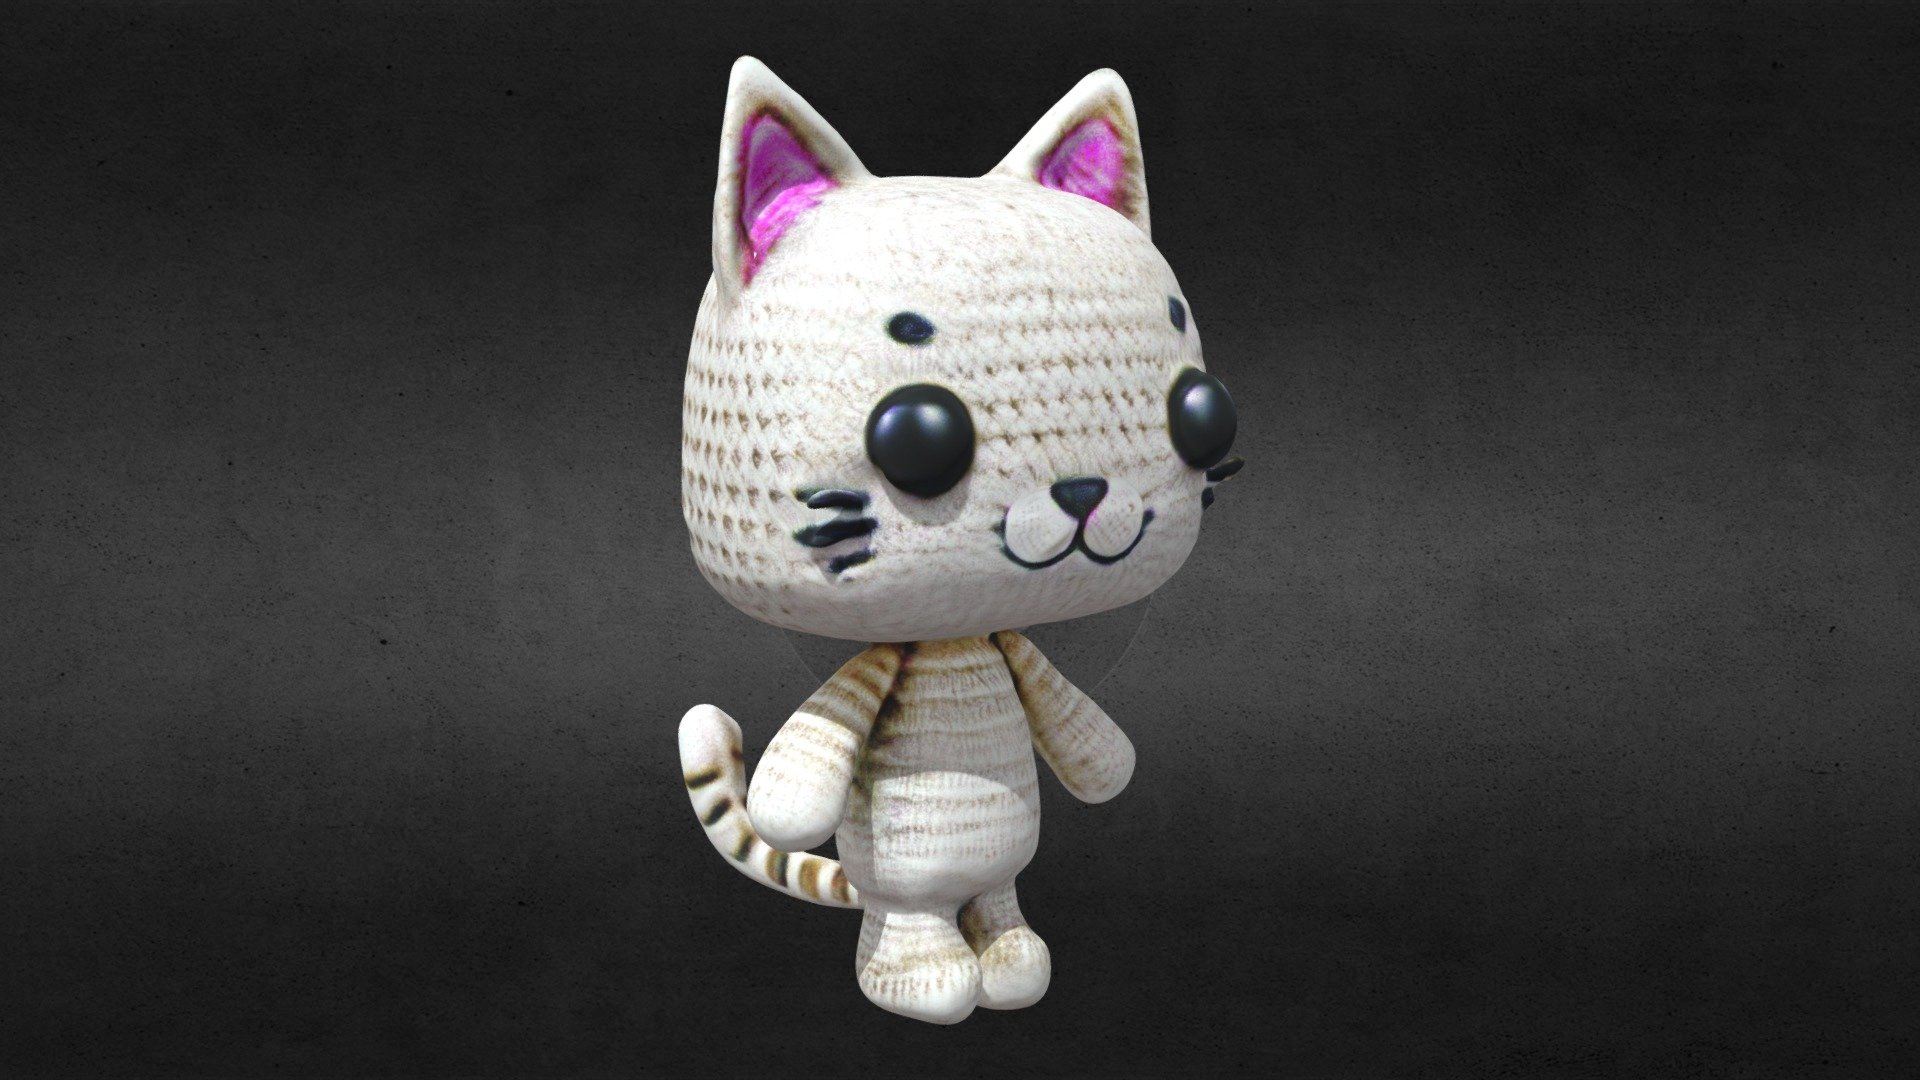 Crochet Funko Cat 3D Model: Delightfully charming, this model captures the essence of a Funko-style cat, transformed into a crochet masterpiece. It features the iconic, oversized Funko eyes and a whimsical expression, all wrapped in a textured crochet look. This model is perfect for adding a touch of whimsy to digital art projects, animations, or as a quirky virtual collectible. Compatible with various 3D software and game engines, it's designed for both commercial and non-commercial use, bringing a unique and cozy vibe to your creative endeavors.

Key Features:

Funko-inspired cat design with oversized eyes.
Detailed crochet texture for a handmade look.
Perfect for digital art, animations, or virtual collectibles.
High-quality model with a charming aesthetic.
Compatible with major 3D software and game engines.

Made with AI - Crochet Funko Cat - Buy Royalty Free 3D model by GAM3D (@gam3d.engine) 3d model